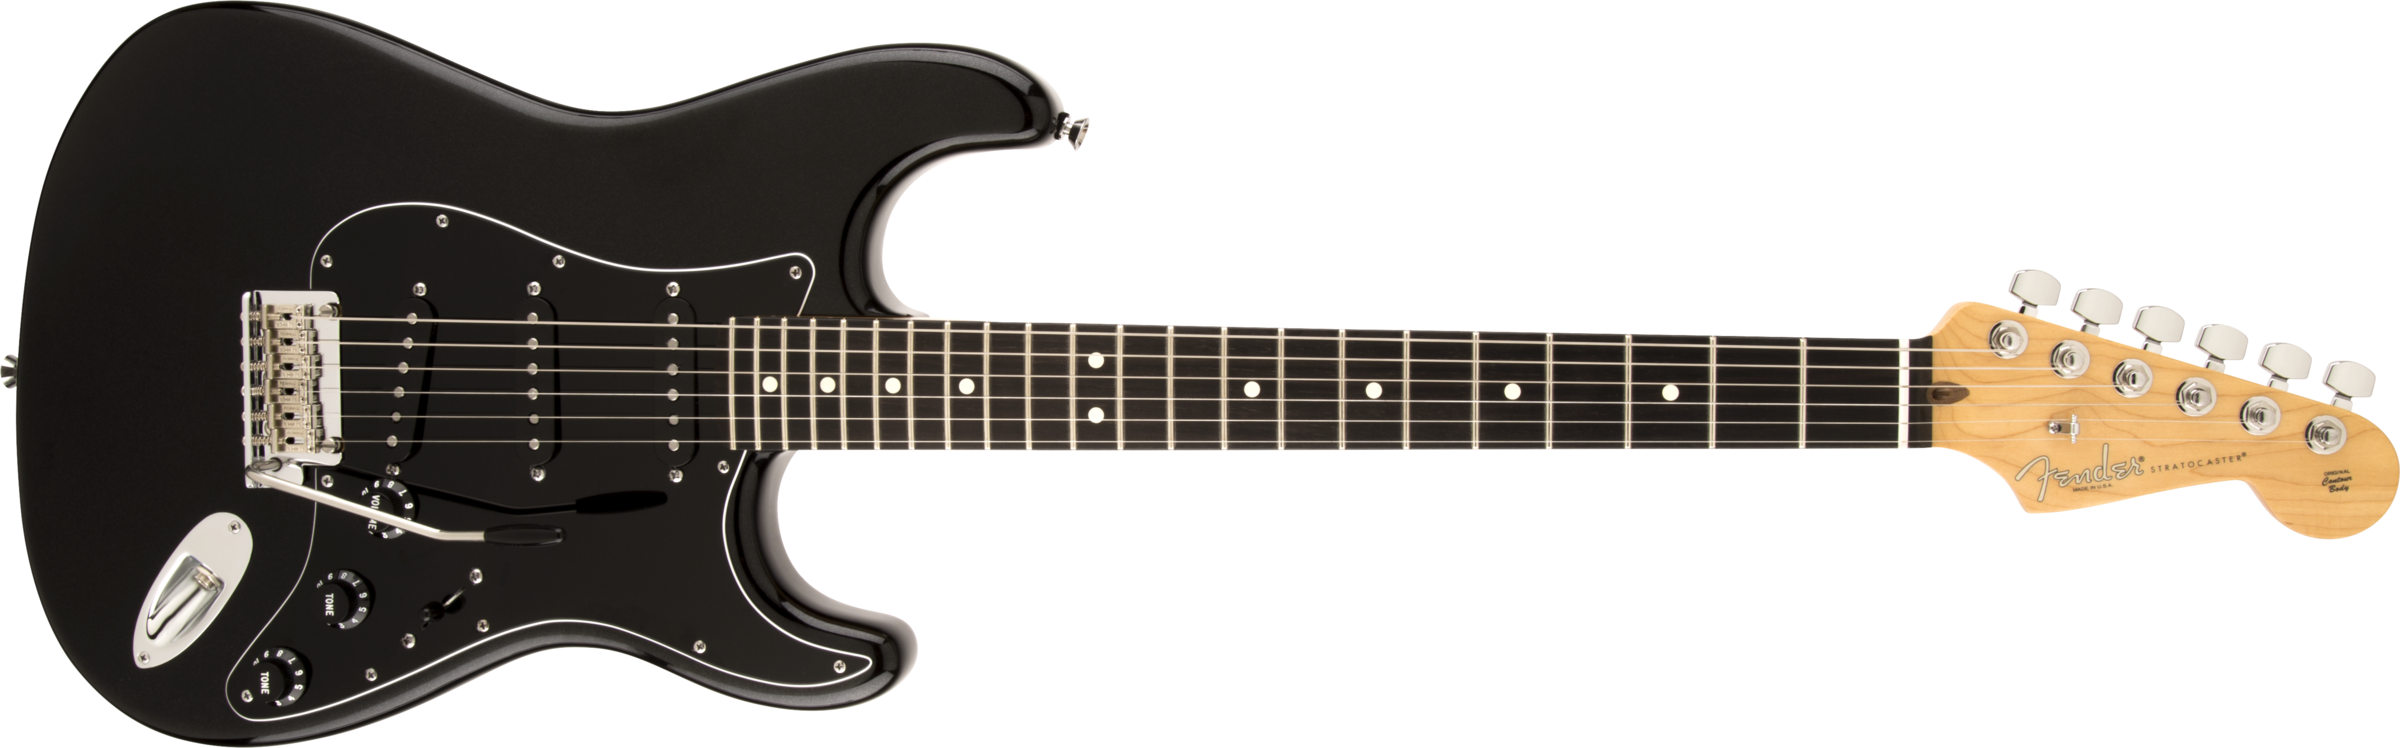 Limited Edition 2015 American Standard Blackout Stratocaster - Audiofanzine